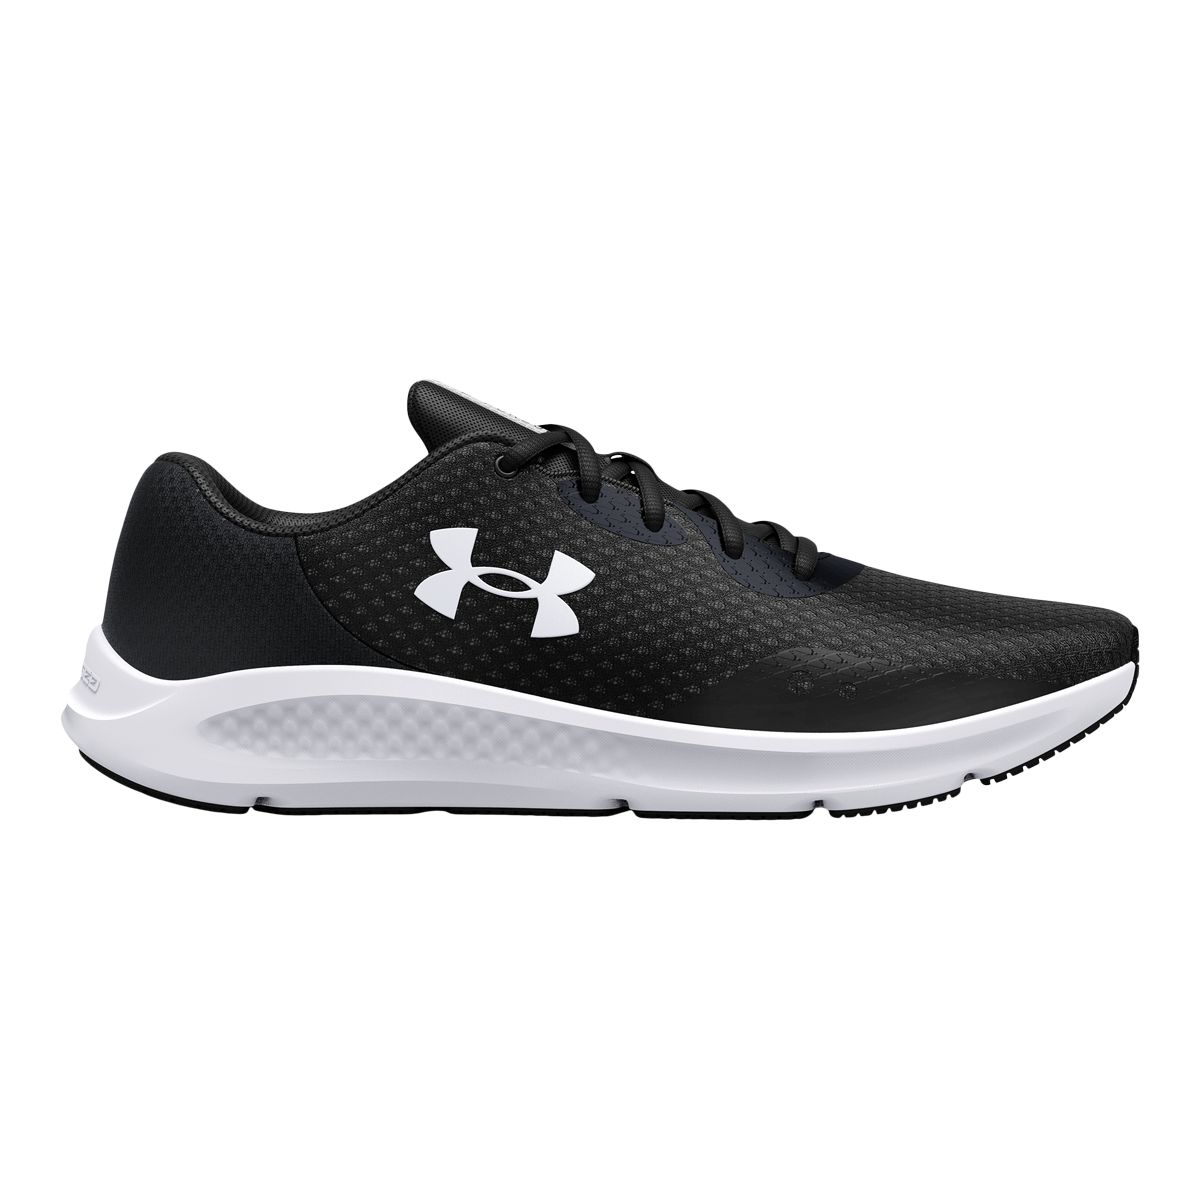 Under Armour Men's Charged Escape 4 Running Shoes